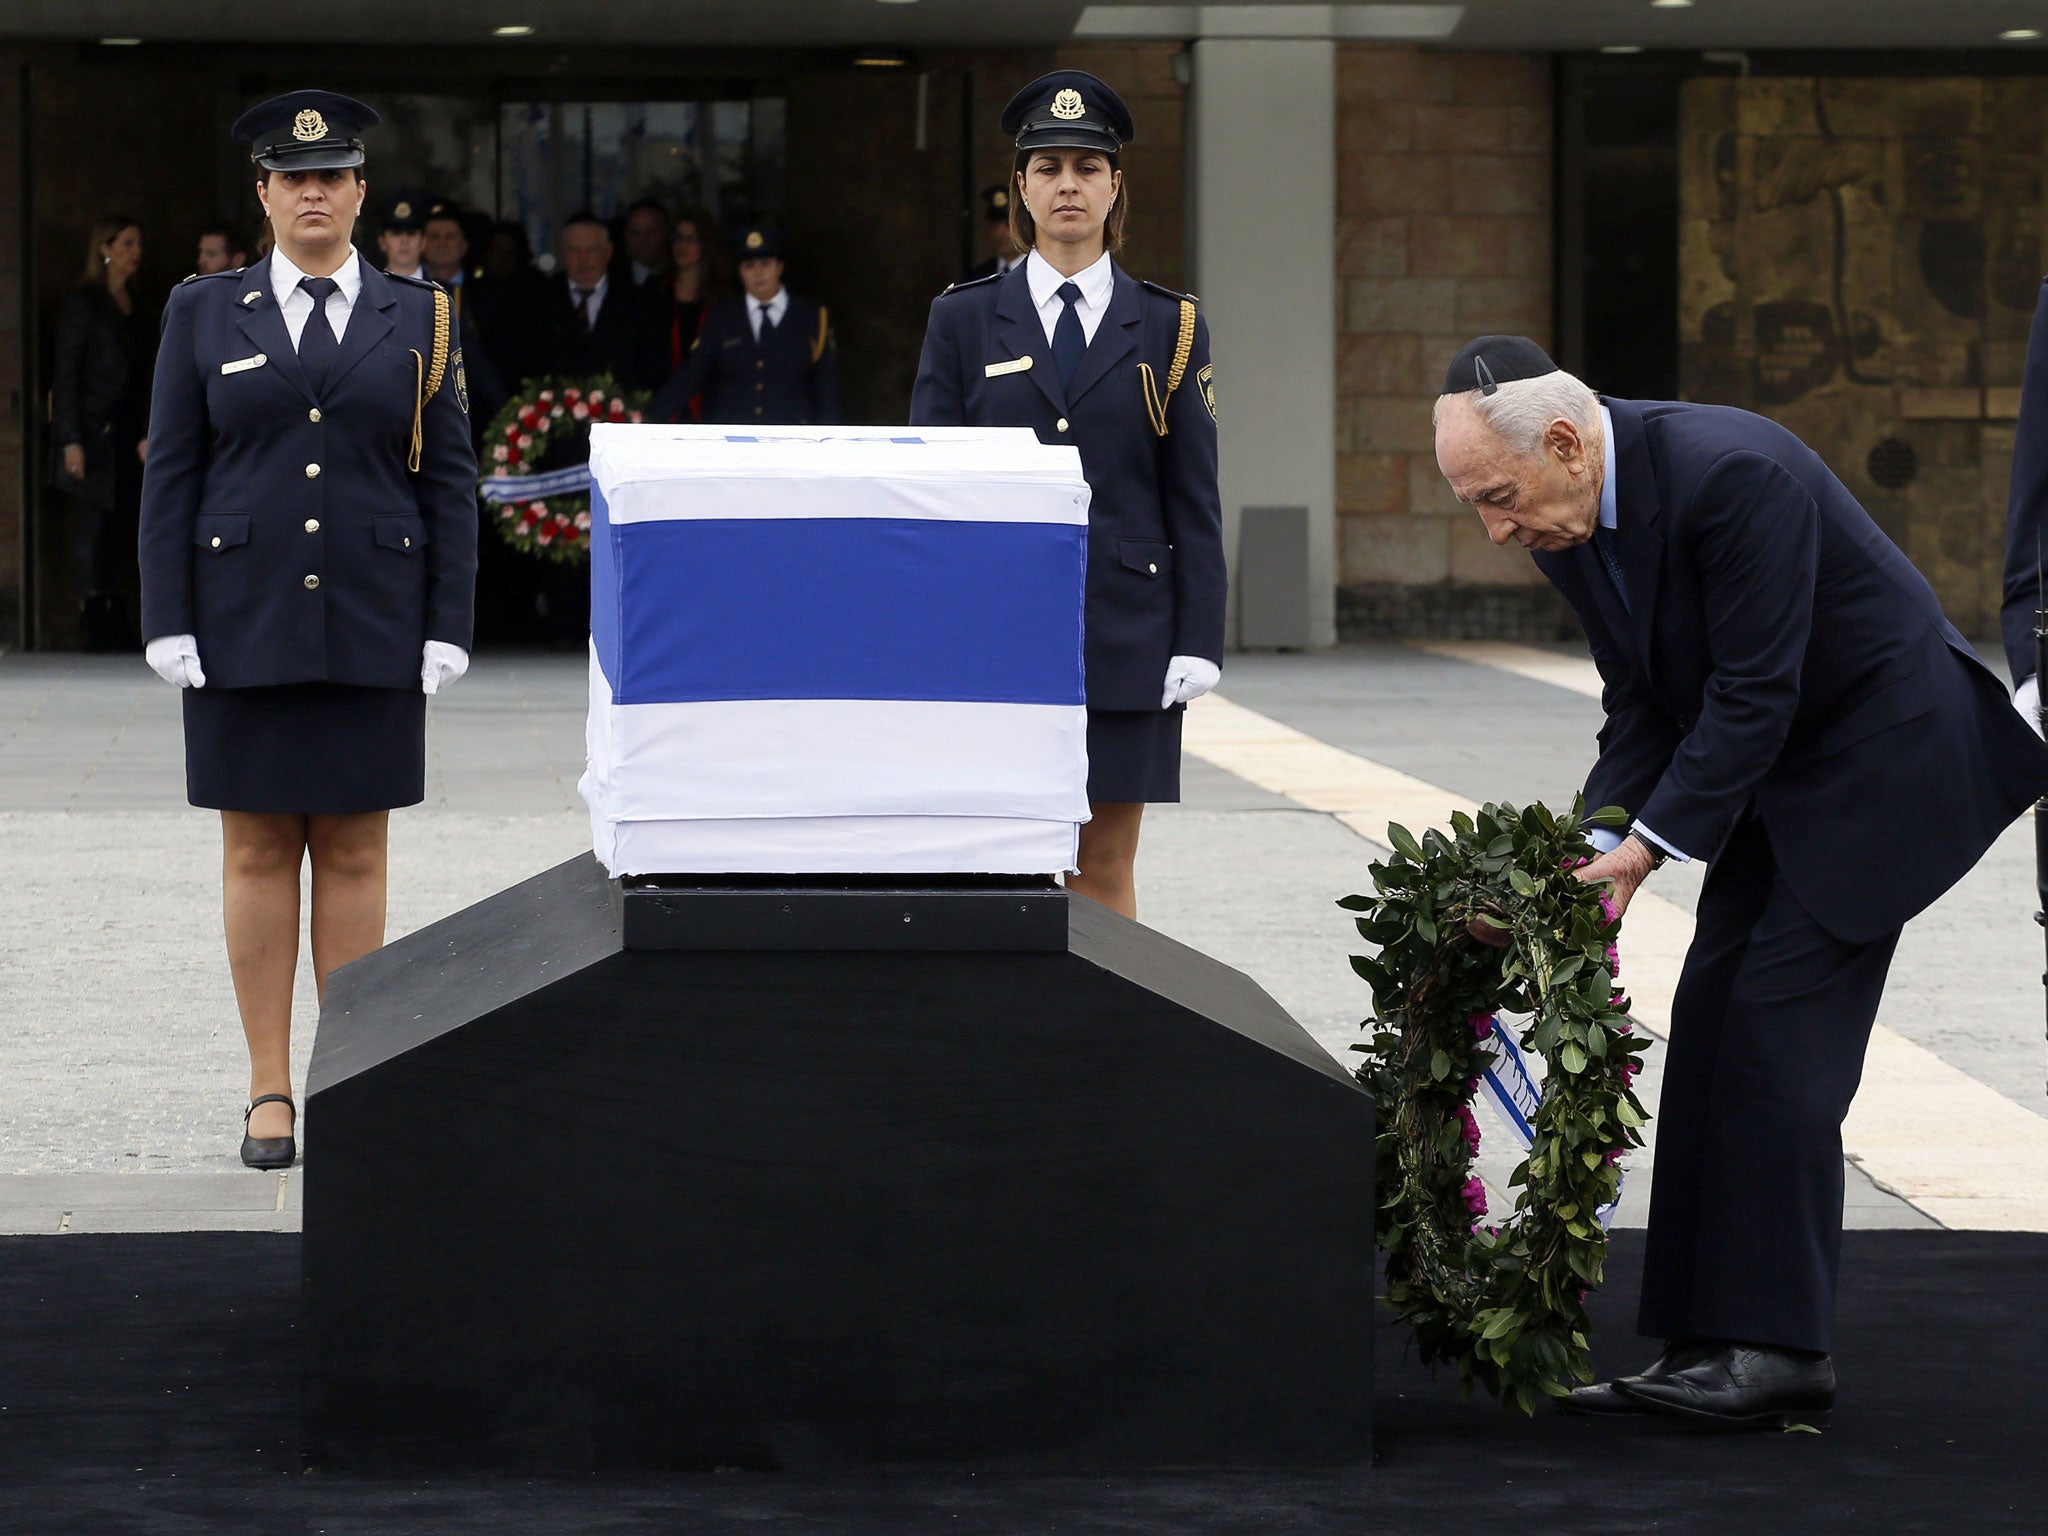 Israel’s President Shimon Peres lays a wreath at the coffin of the former Prime Minister in Knesset Plaza, Jerusalem